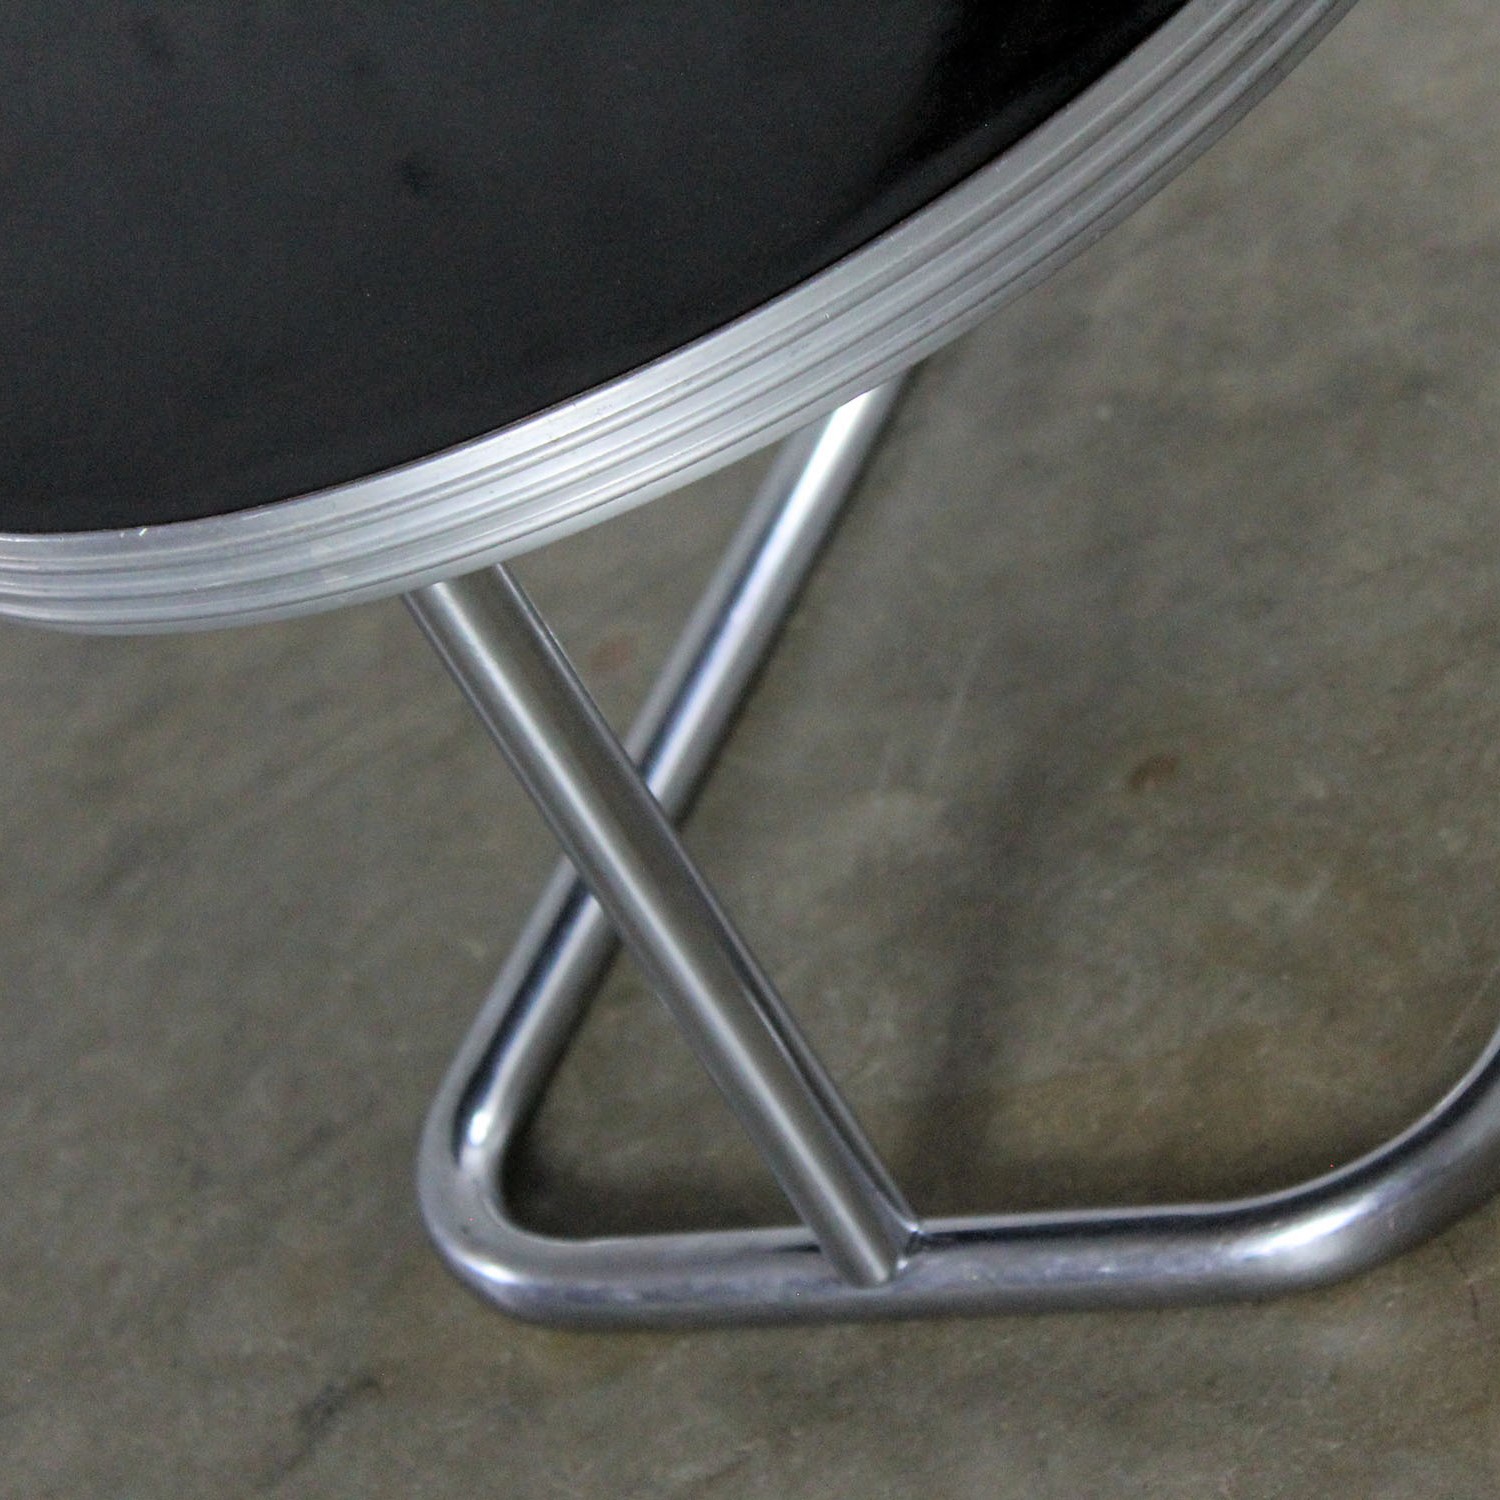 Art Deco Machine Age Streamline Moderne Chrome and Black Two-Tiered End Table by Duro Chrome